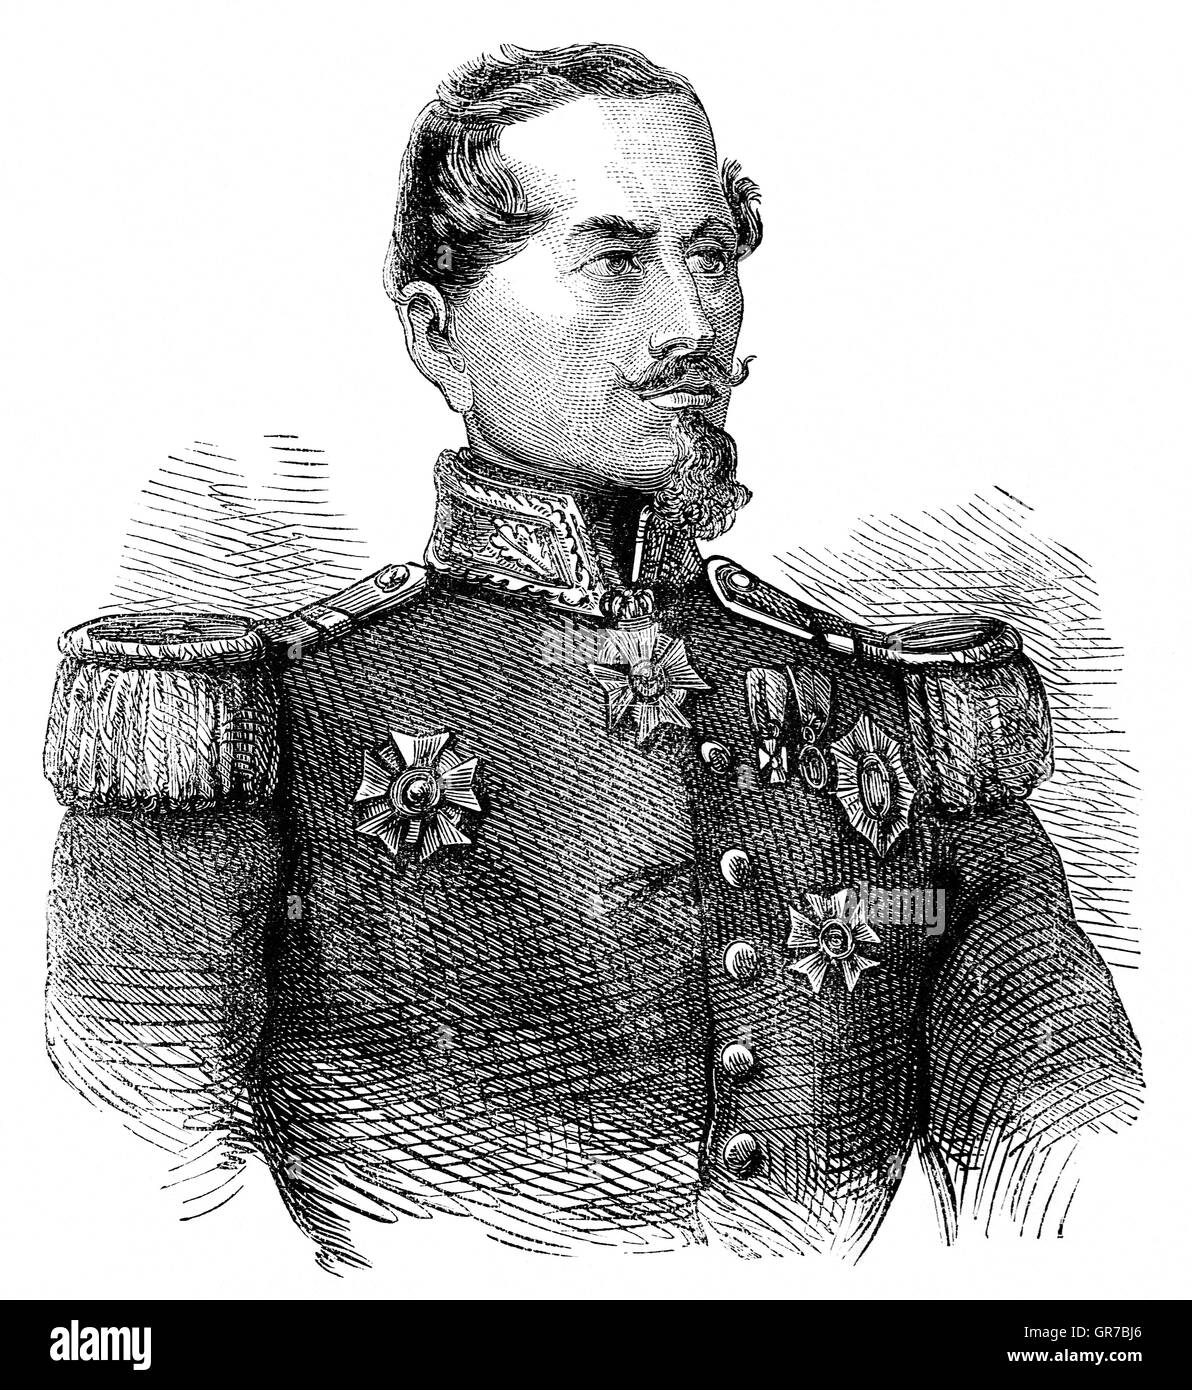 Armand-Jacques Leroy de Saint-Arnaud (1798 – 1854) was a French soldier and Marshal of France. He served as French Minister of War until the Crimean War when he became Commander-in-chief of the army of the East. He later set out to command the French forces in the Crimean War, alongside his British colleague Lord Raglan. Stock Photo